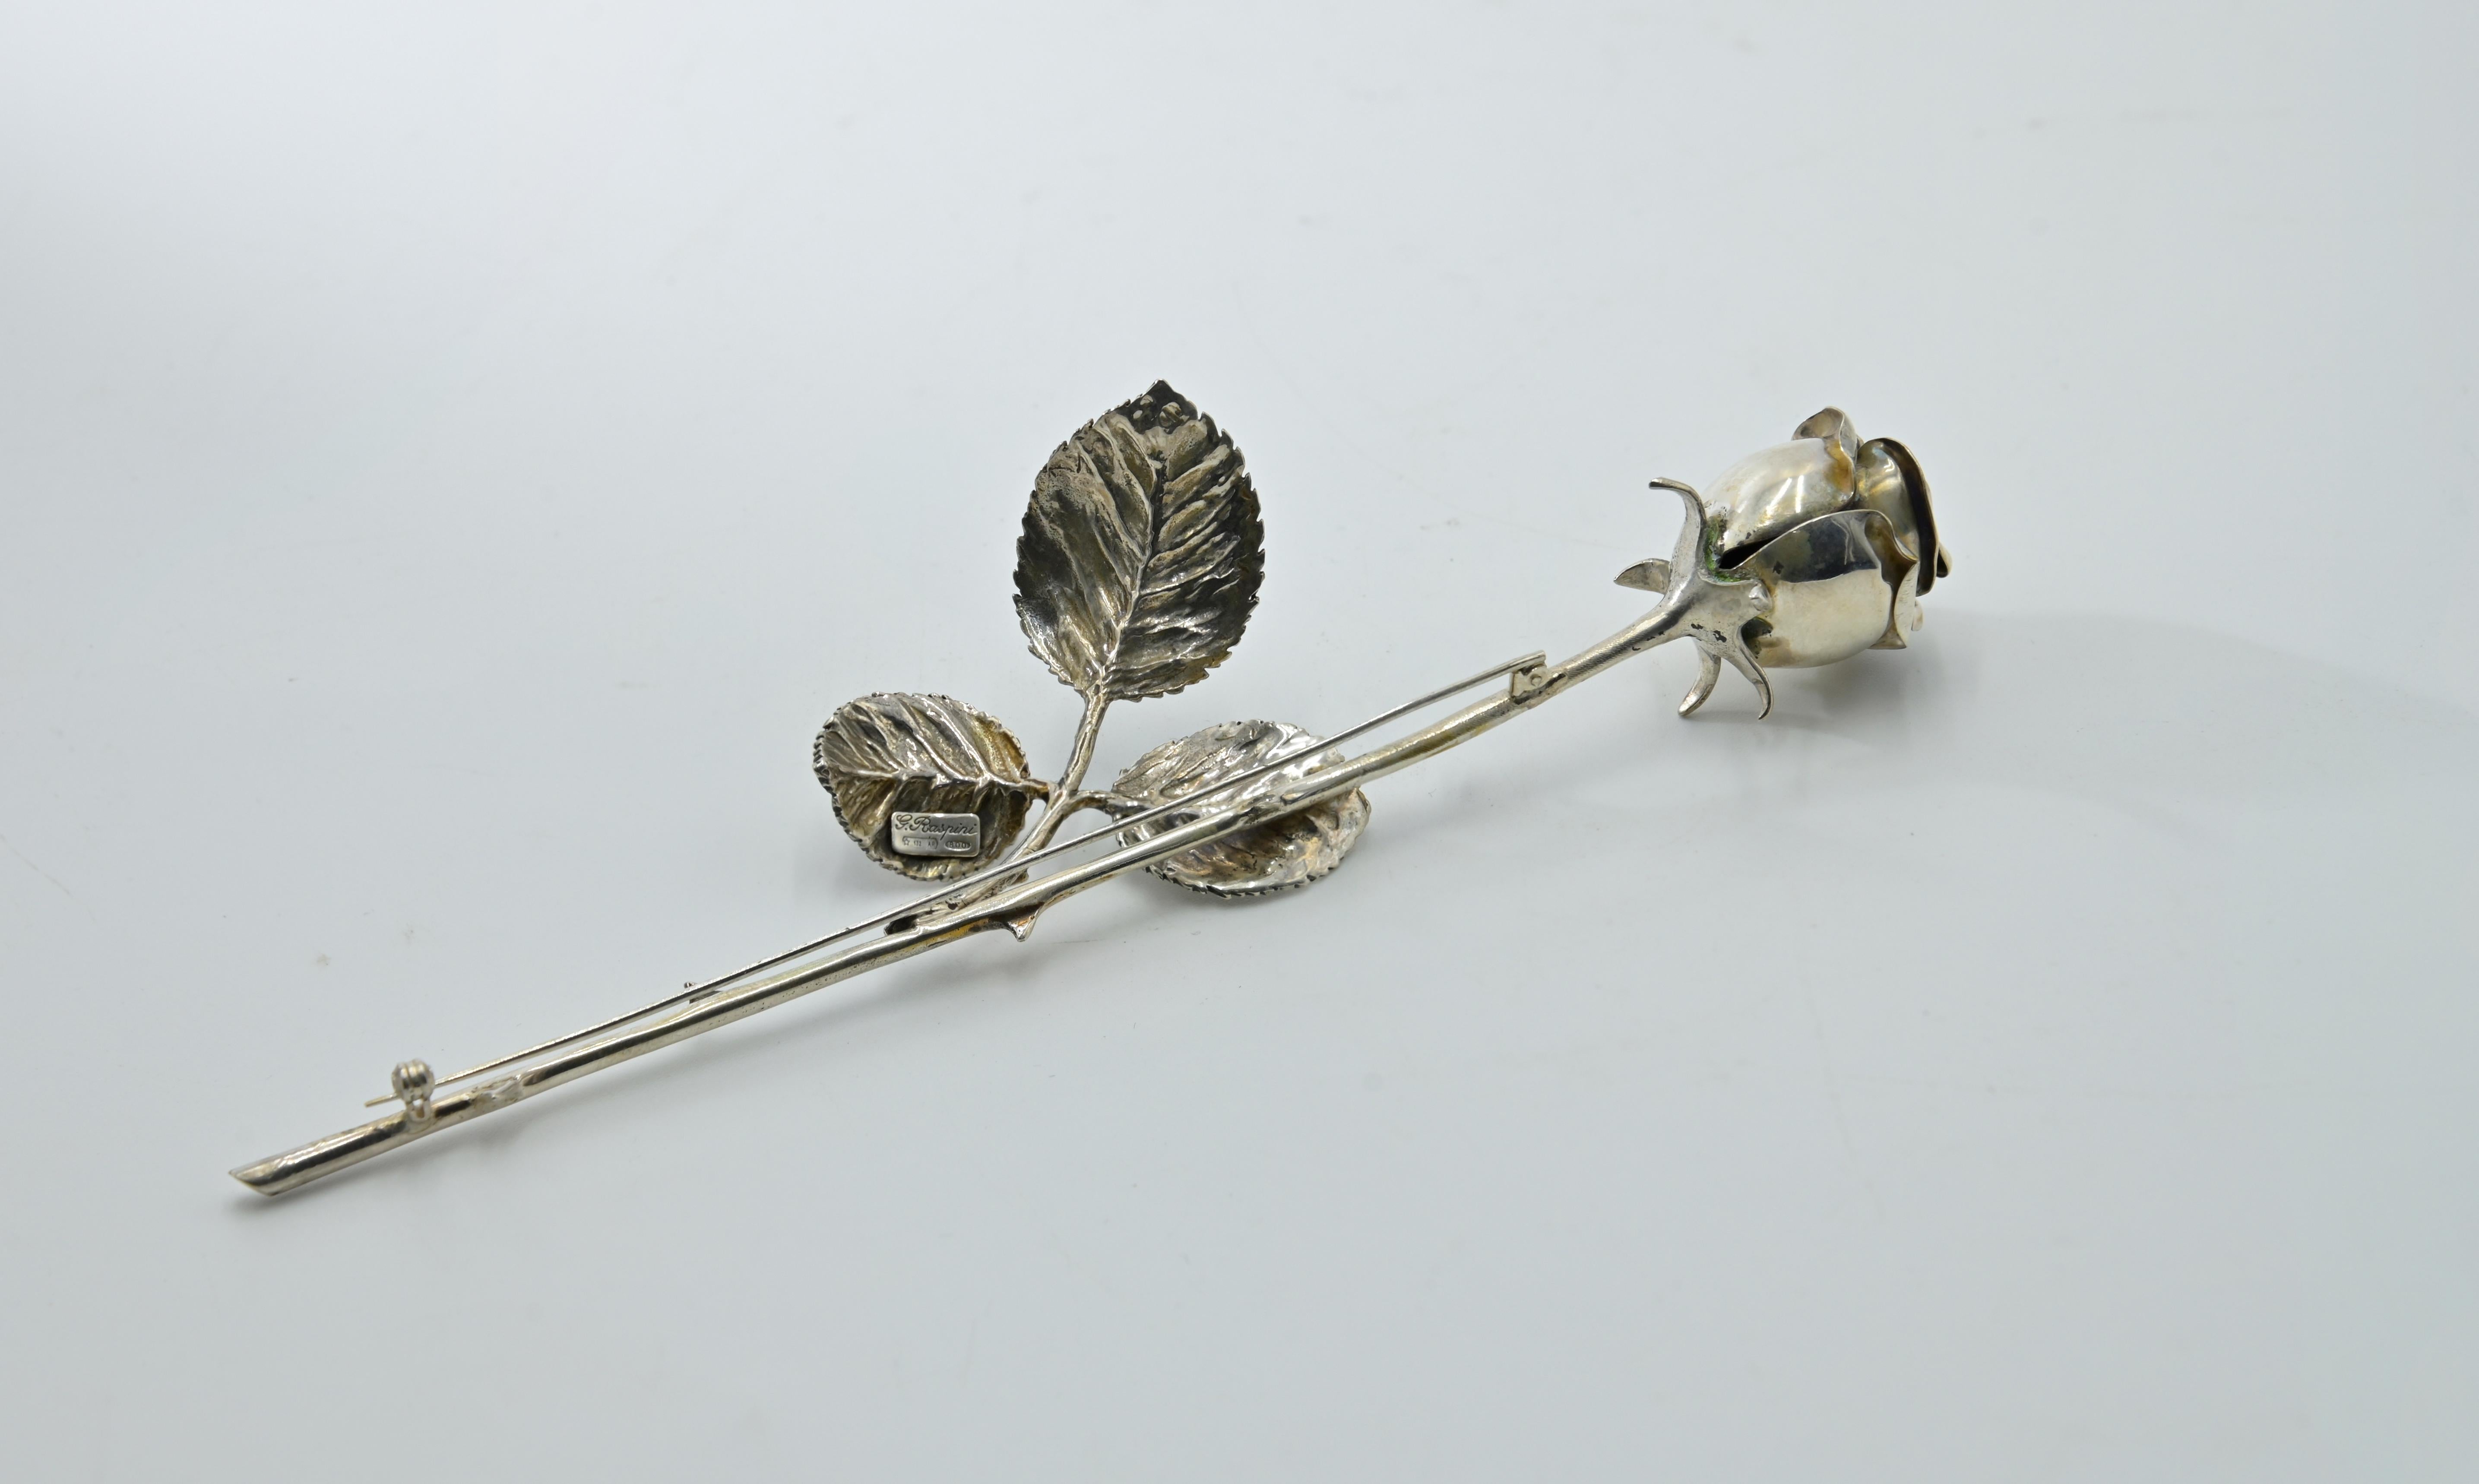 Brooch in the form of a Rose, with its original case.
Realized in Italy, Arezzo, by G. Raspini in 1960s.

Silver. L. 17.8 cm, 44 g.

Hallmarked with guarantee and maker's marks as well as with purity '800'.

Min. surface scratches. 

Good conditions 